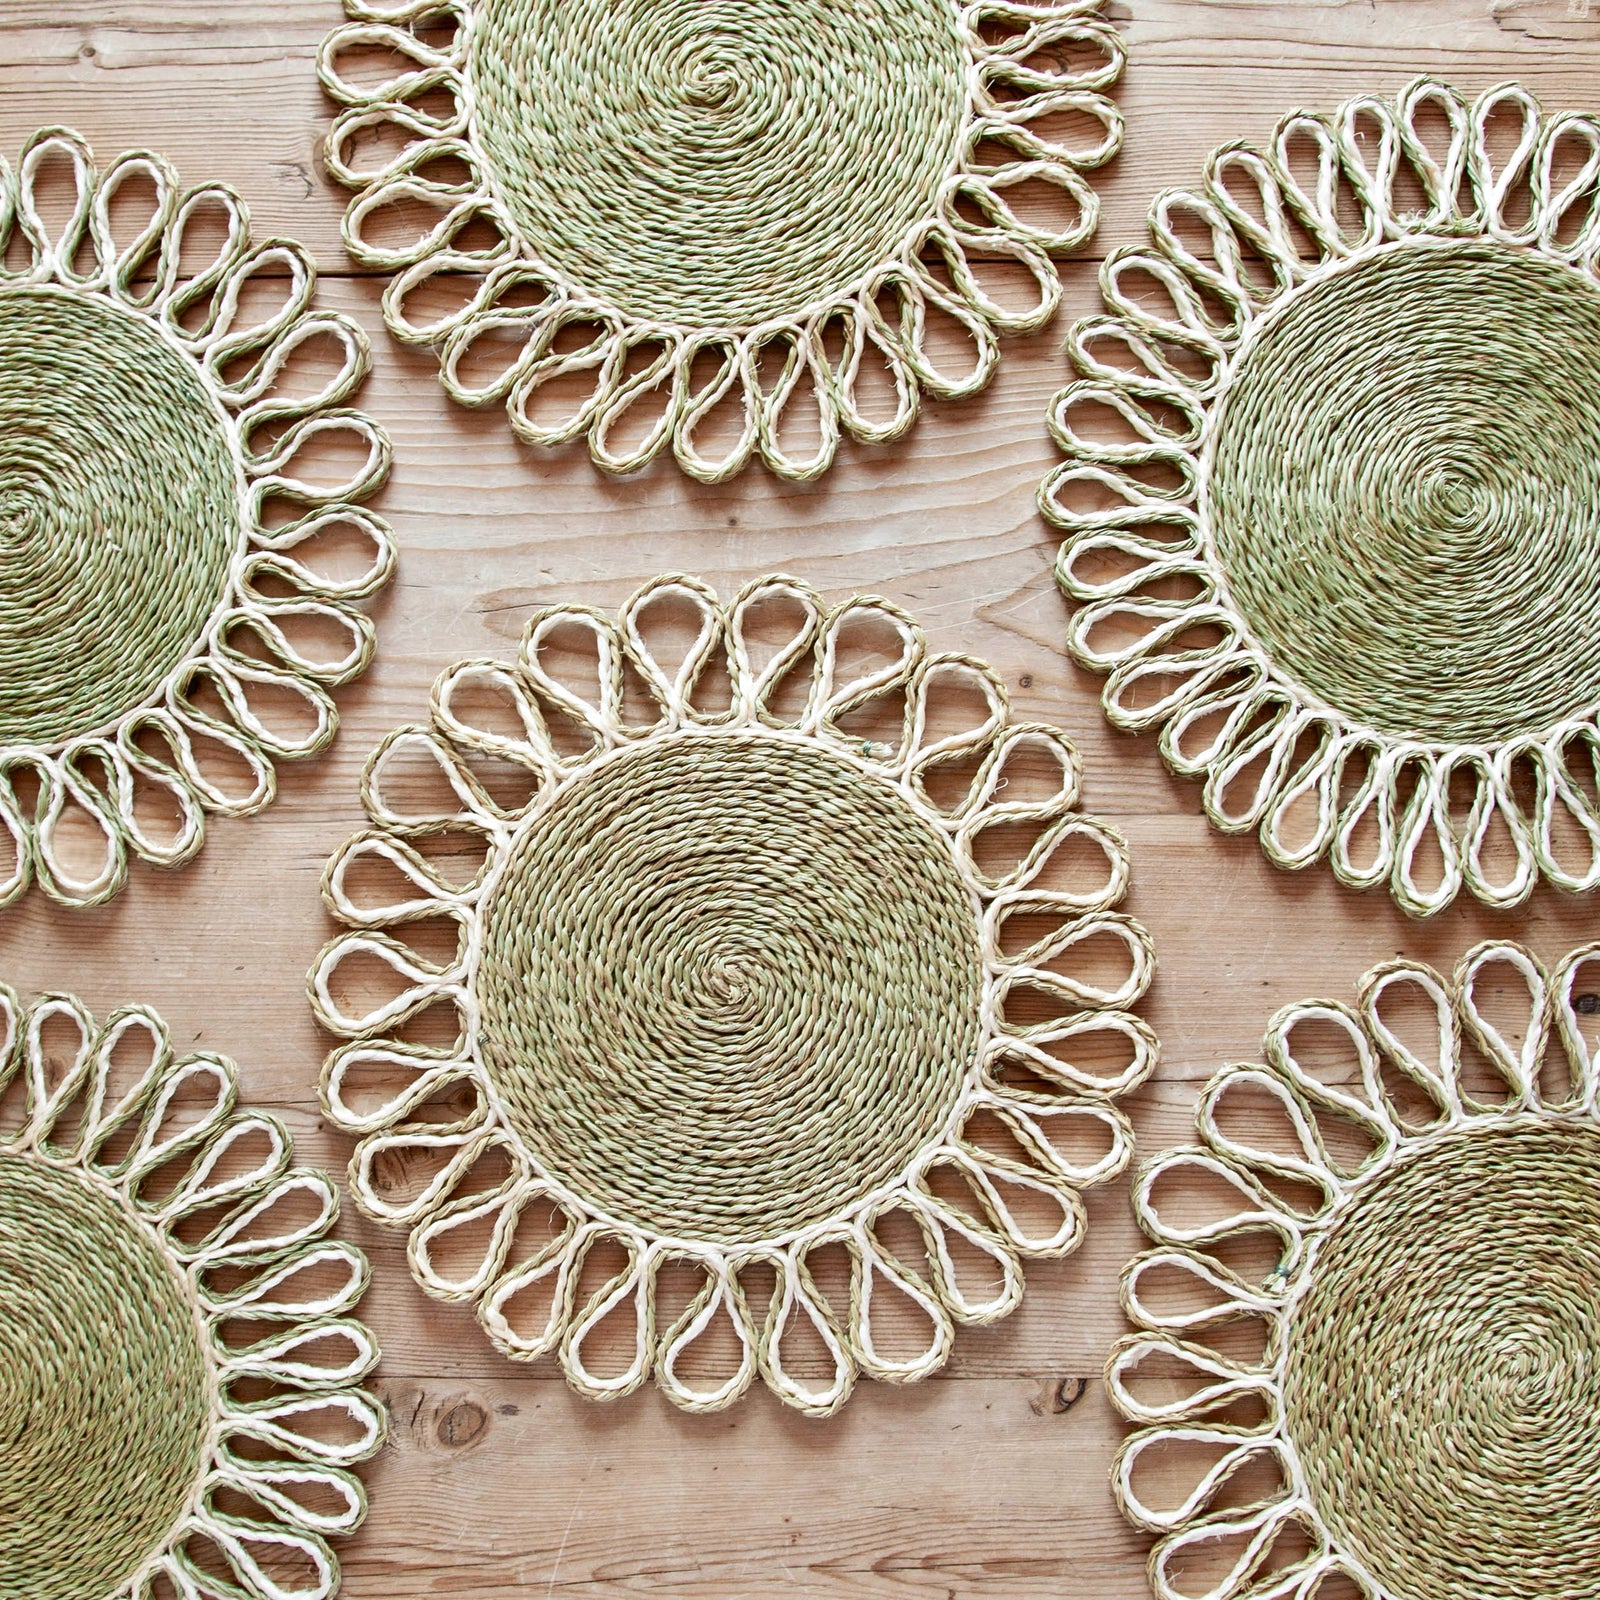 Looped sisal natural and white placemats